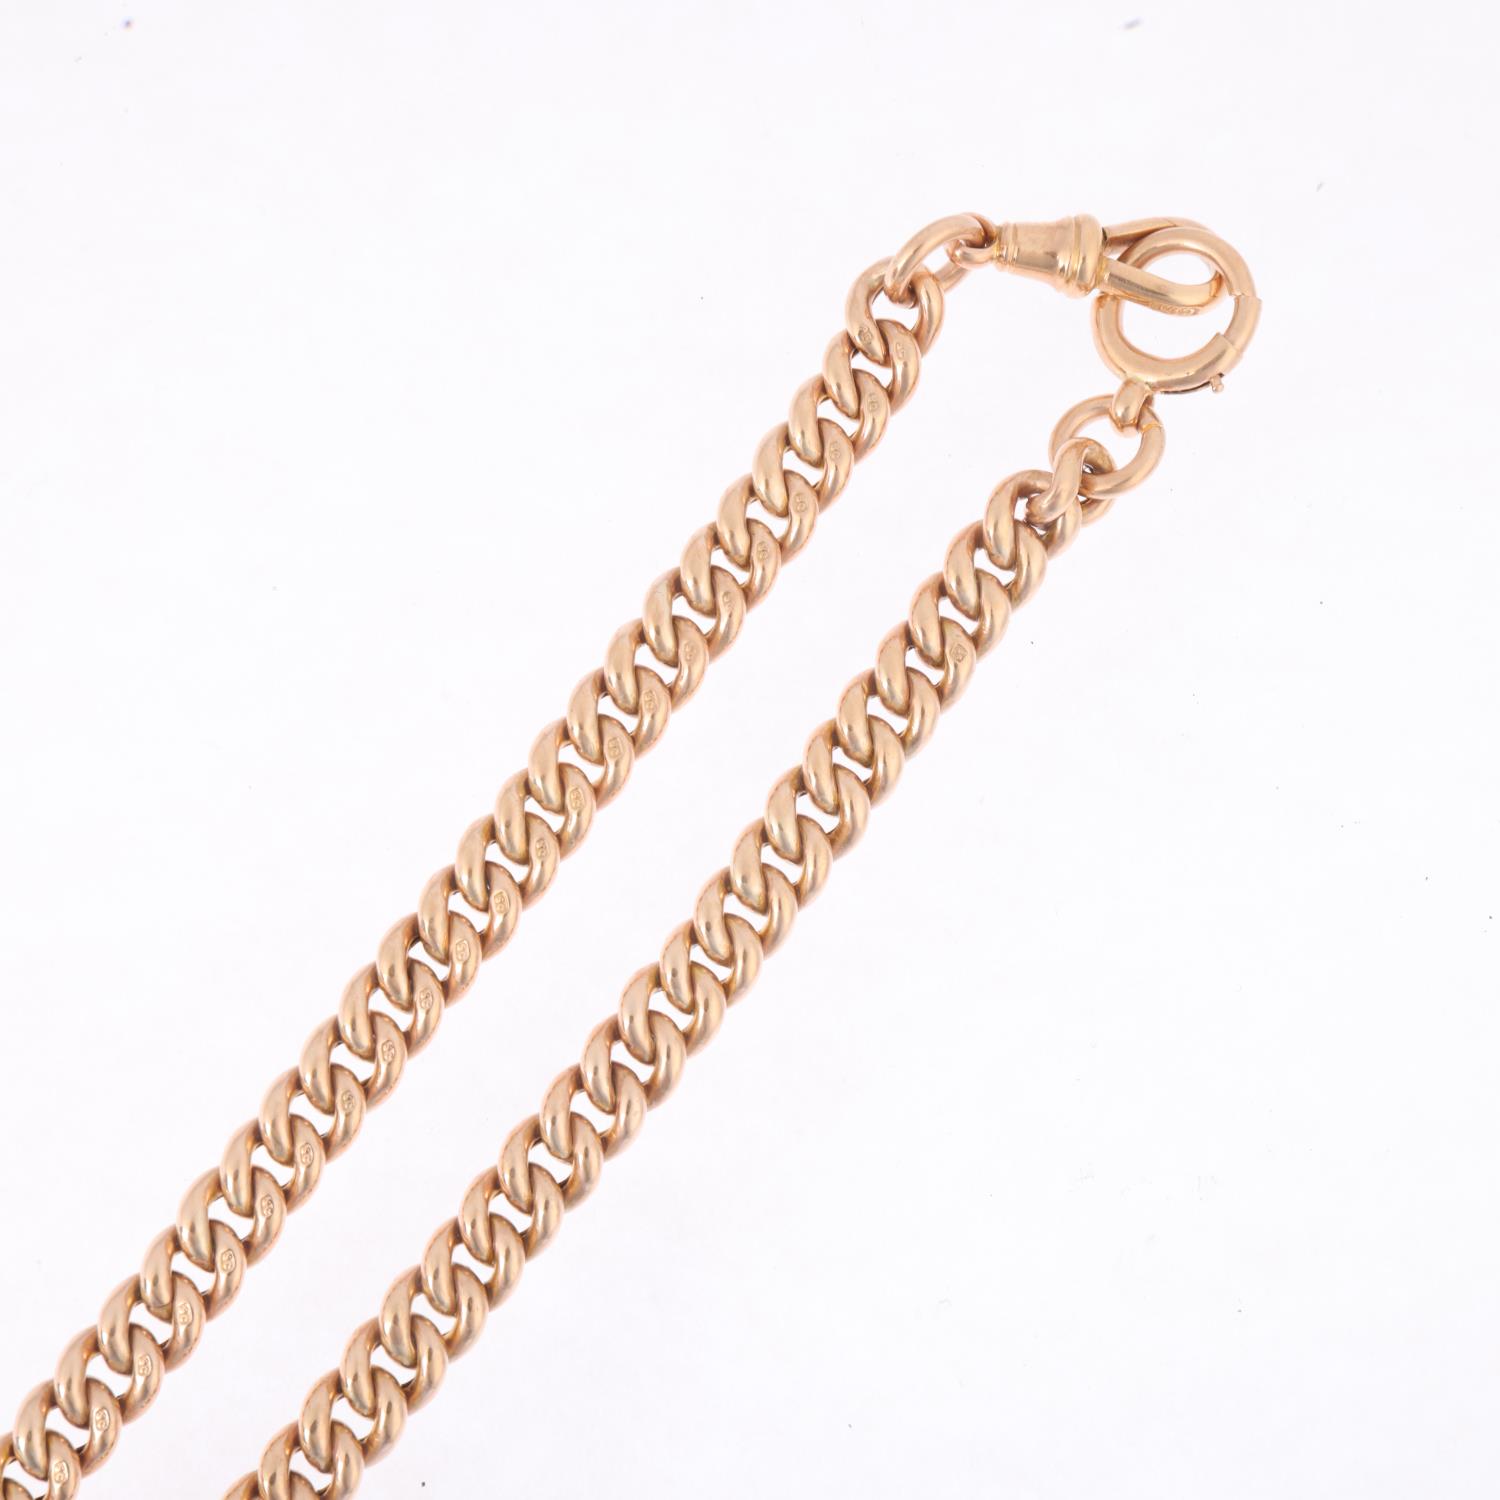 An Antique 9ct gold graduated hollow curb link Albert chain necklace, with 9ct T-bar dog clip and - Image 3 of 4